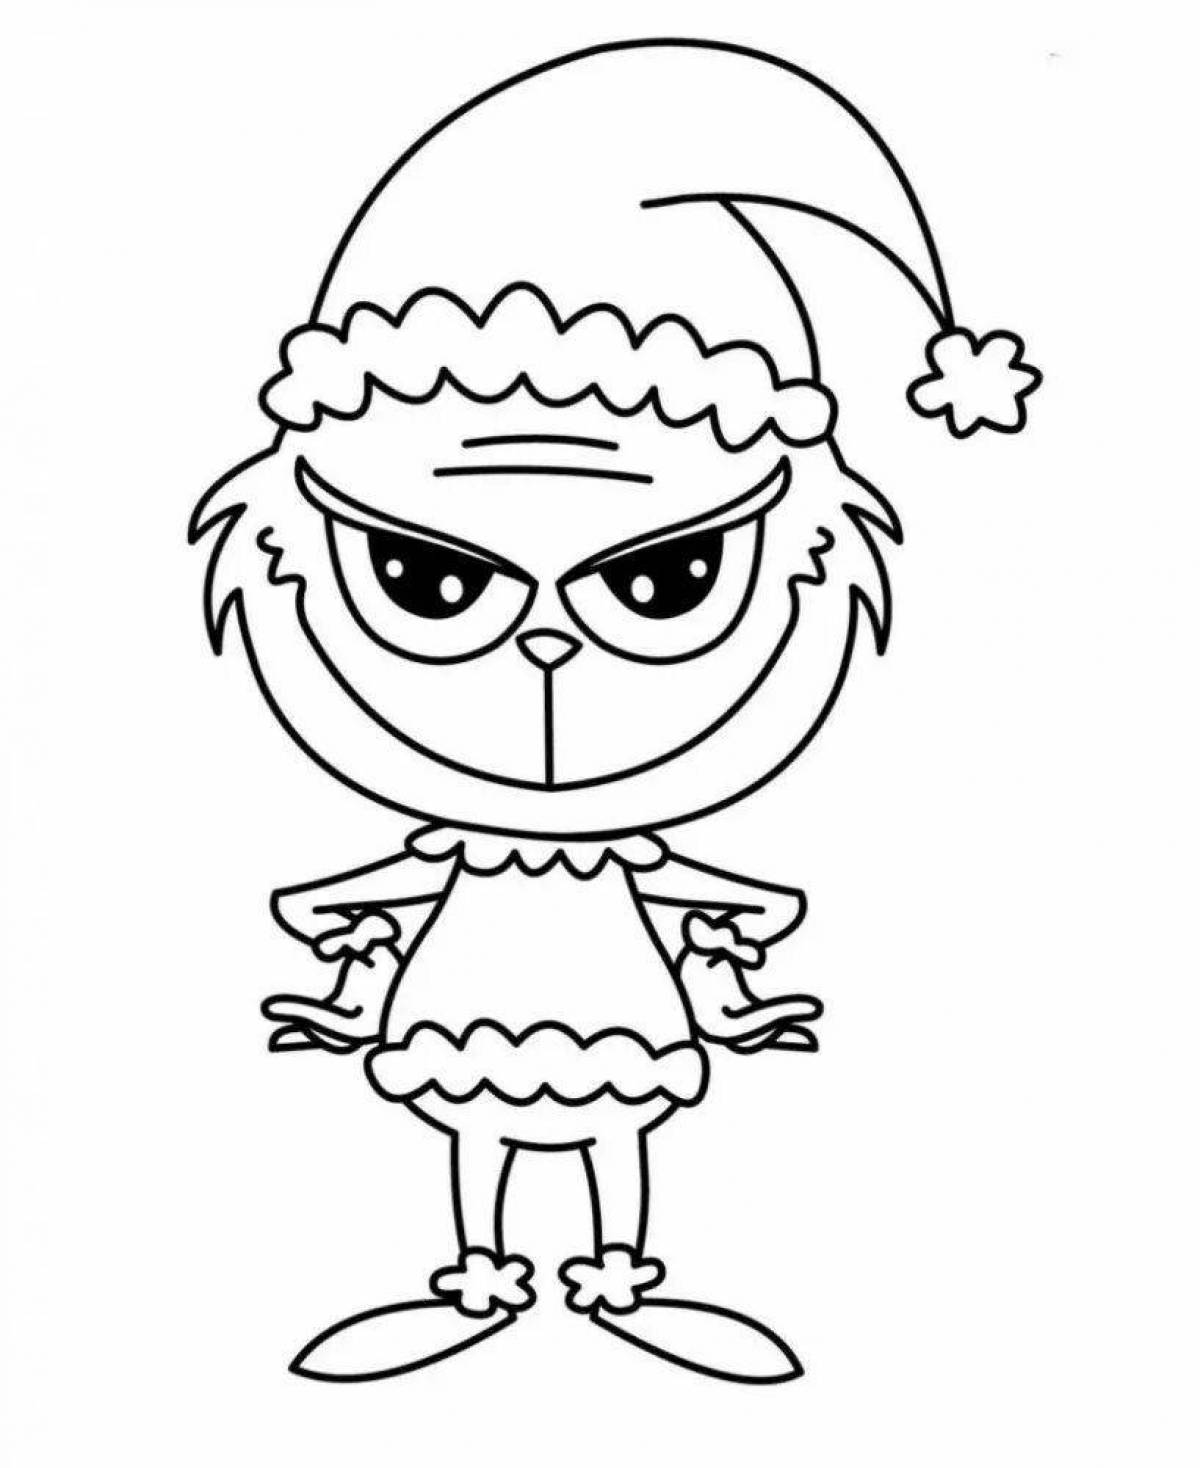 Magic grinch coloring page